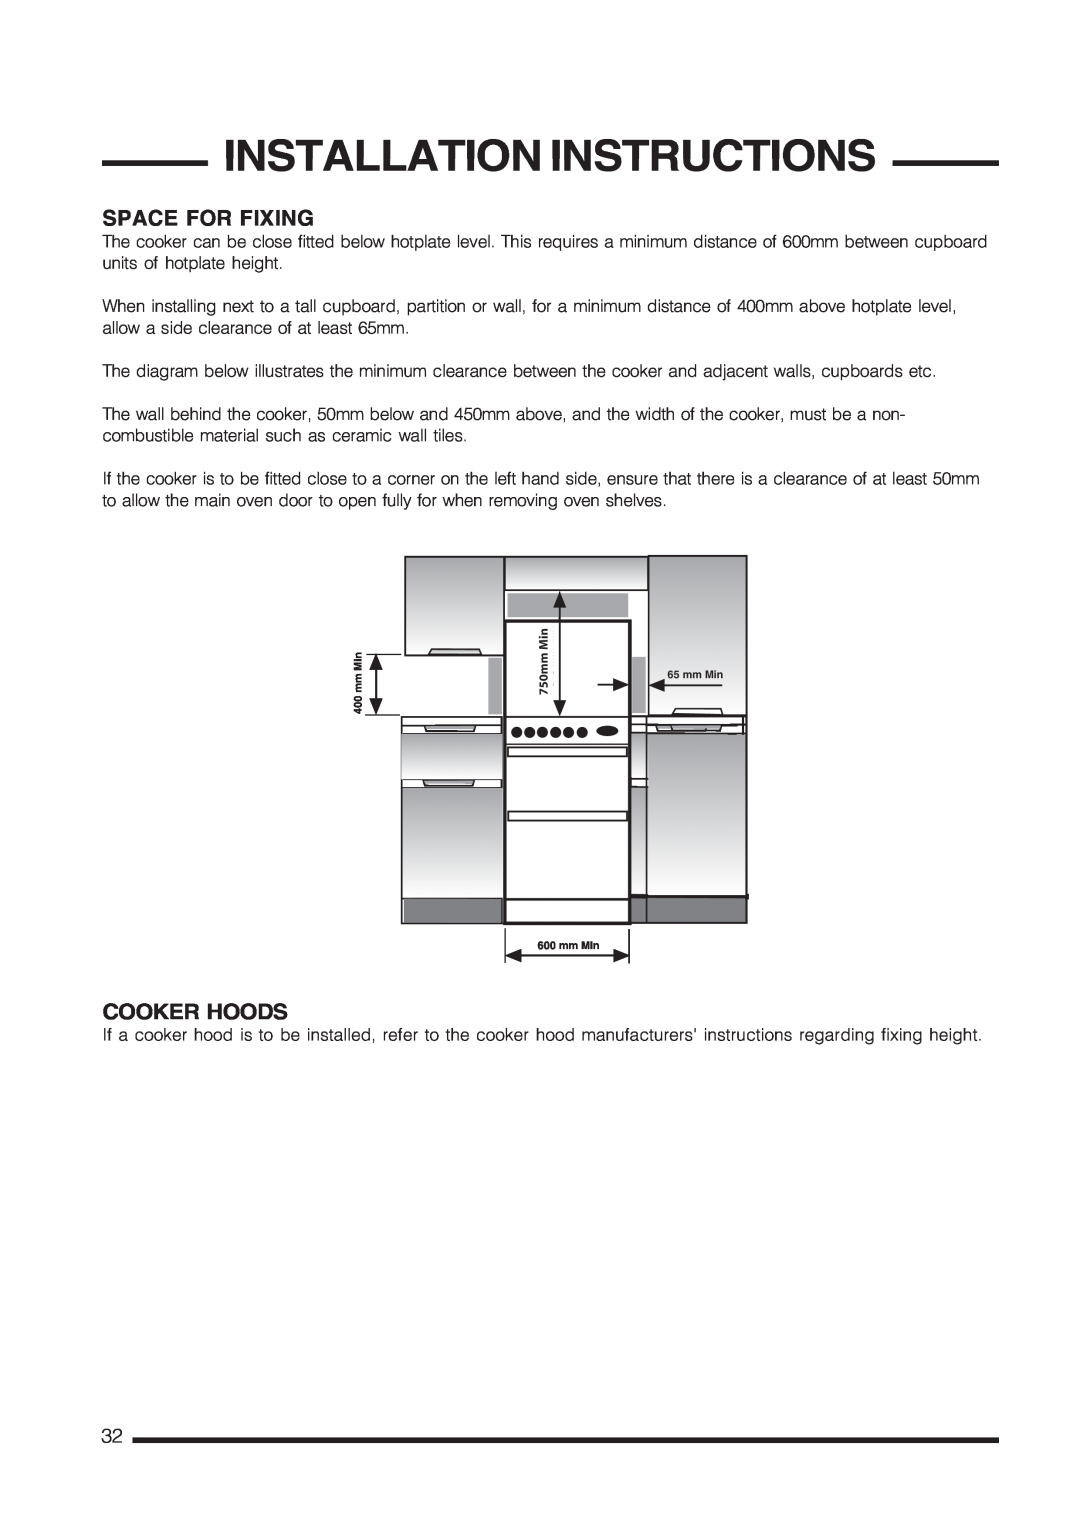 Cannon C60GCIS installation instructions Space For Fixing, Cooker Hoods, Installation Instructions 